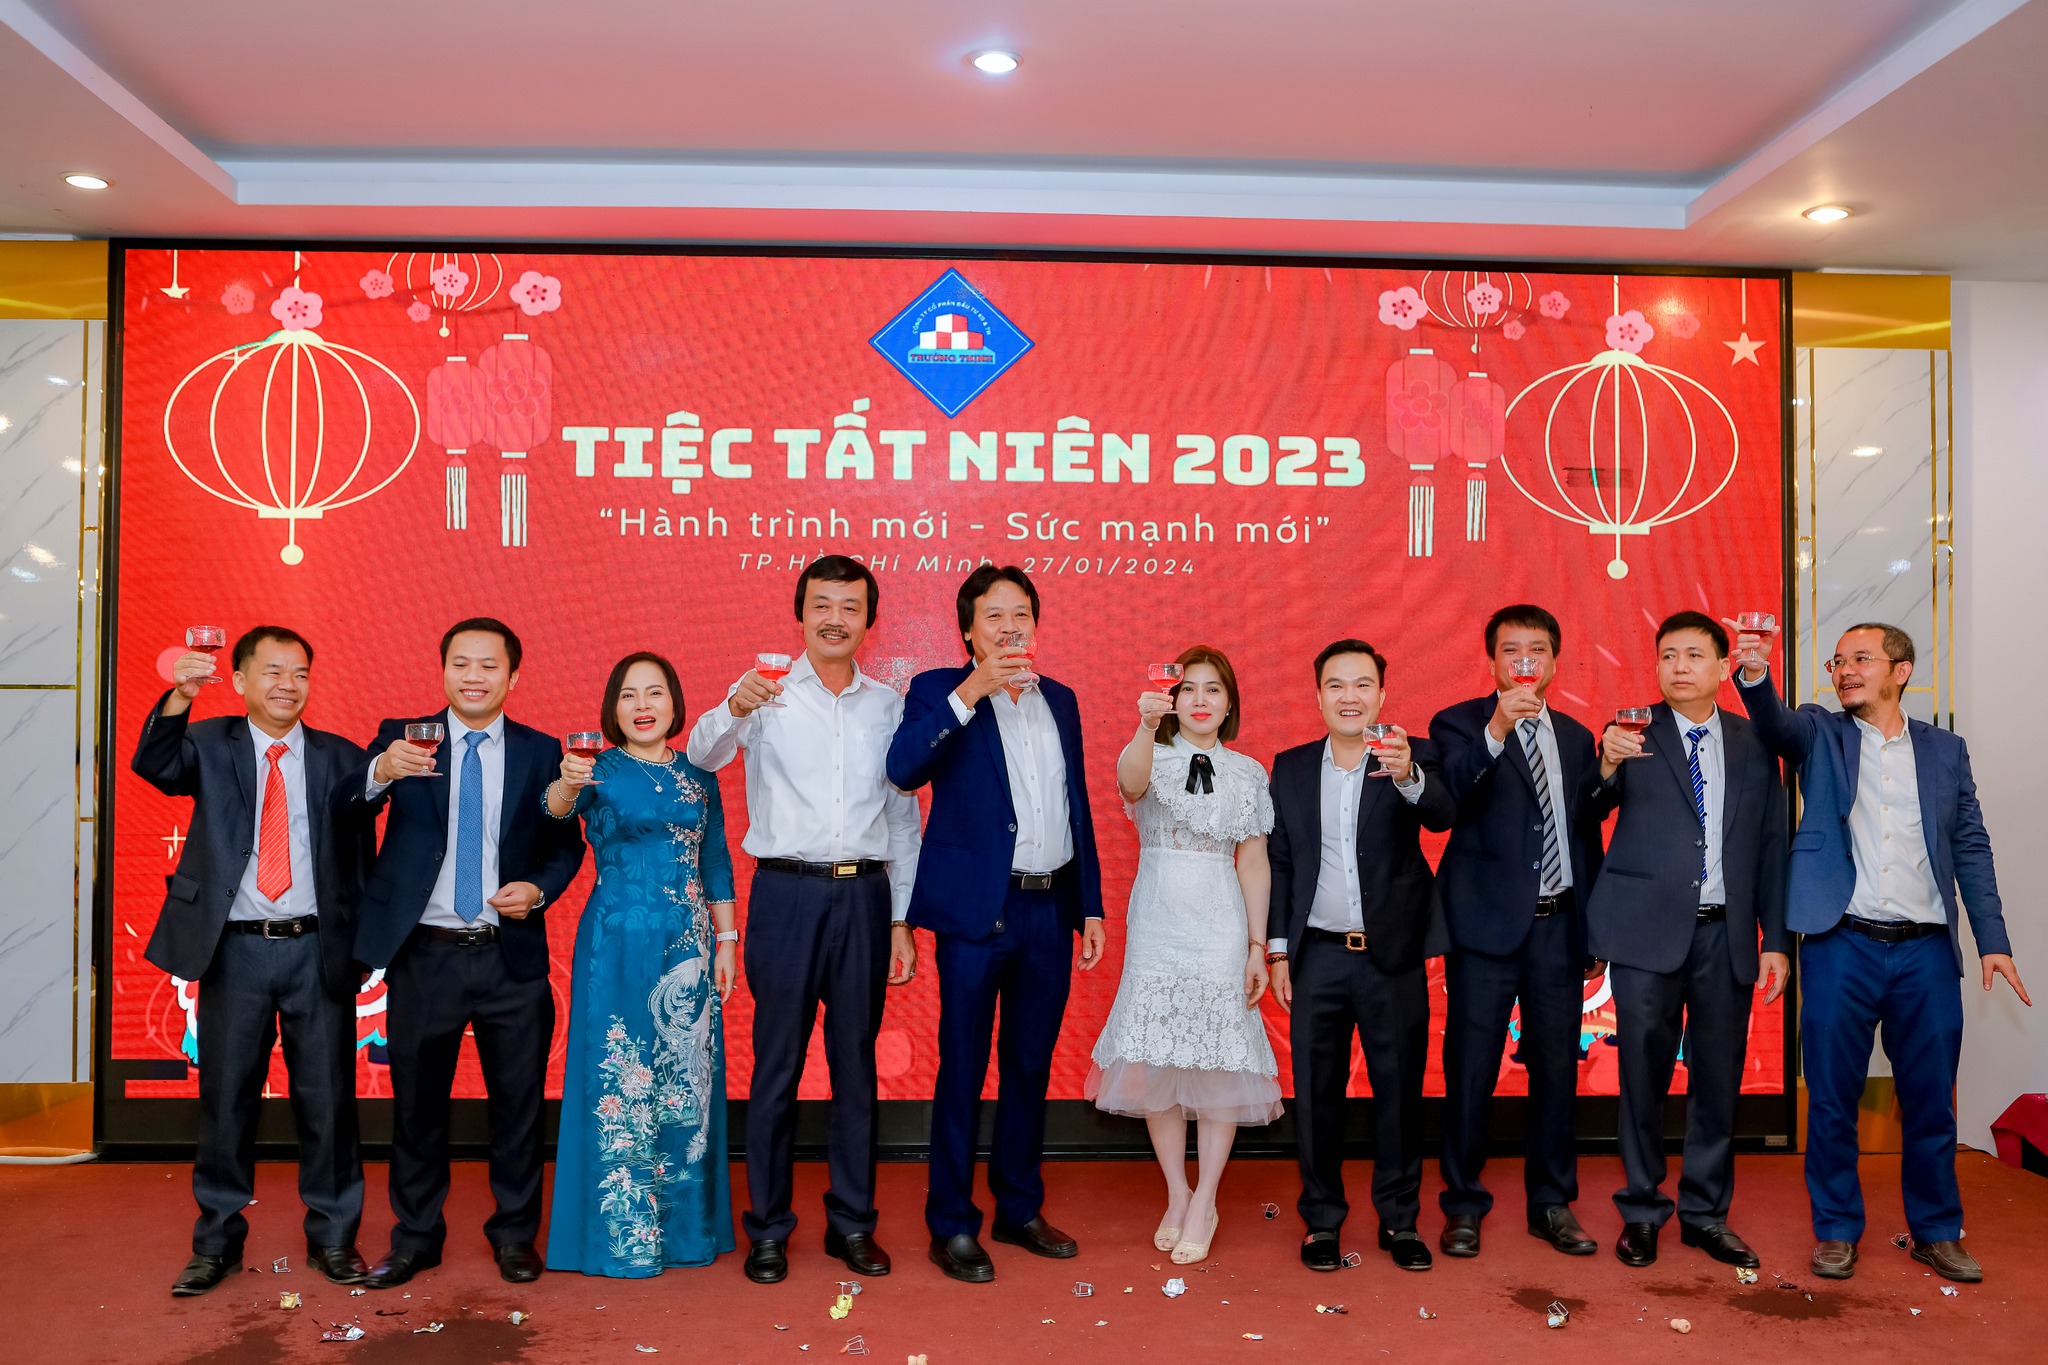 2023 Year end party of Truong Thinh Corp Family